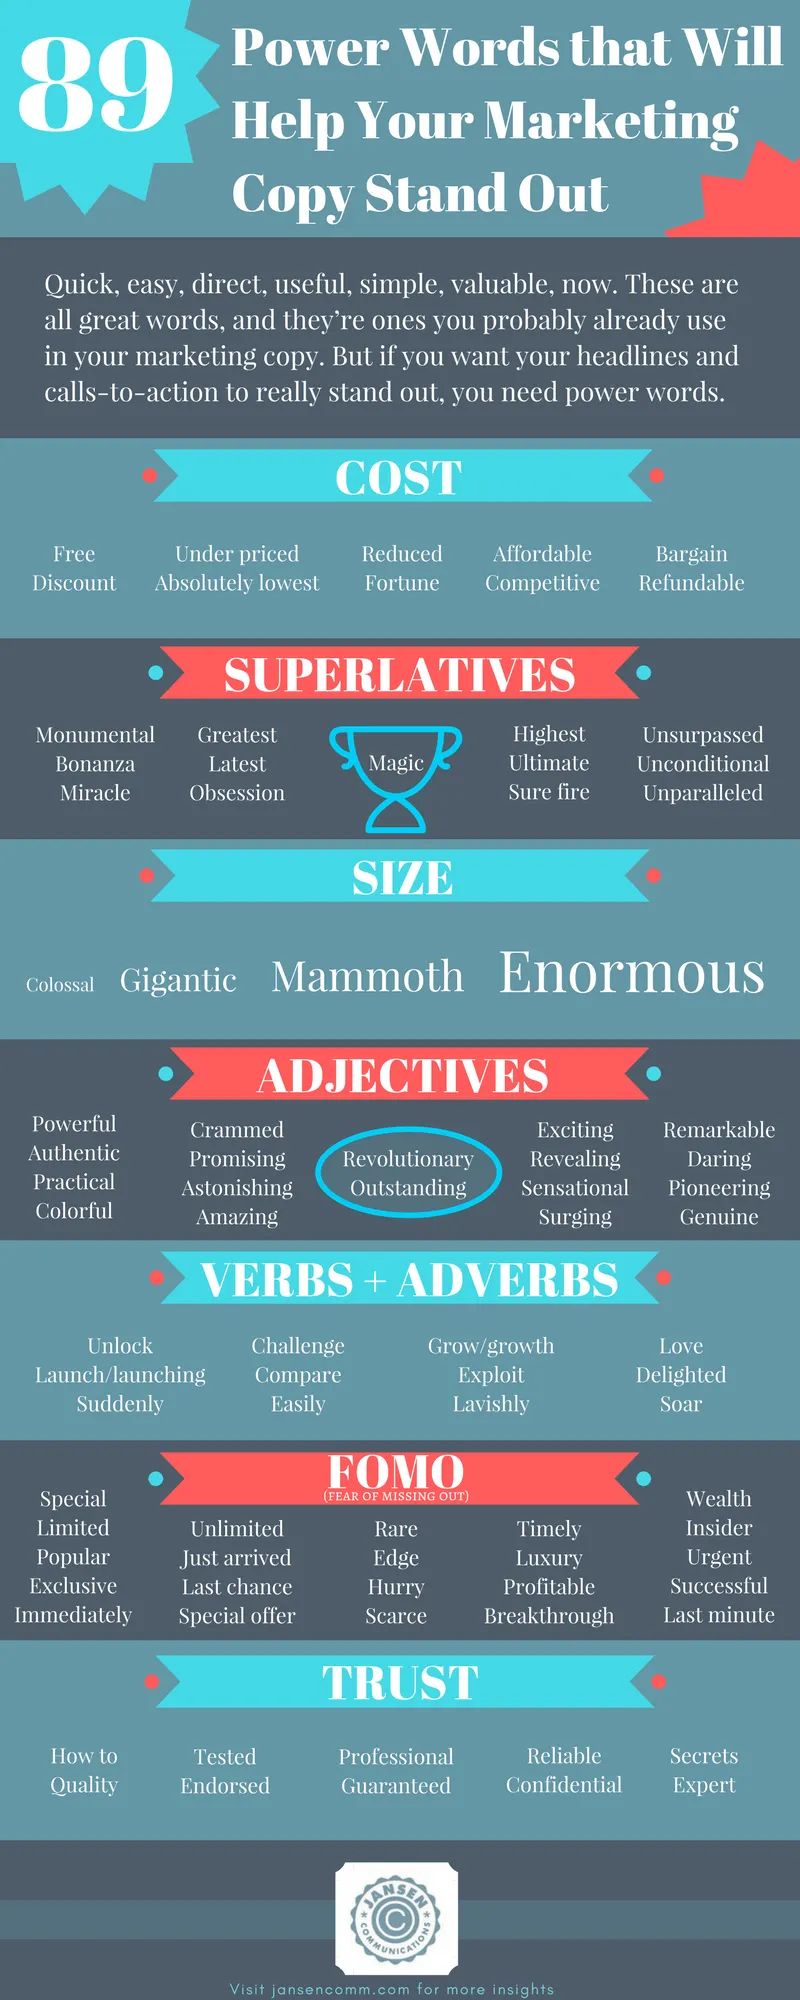 89 power words infographic